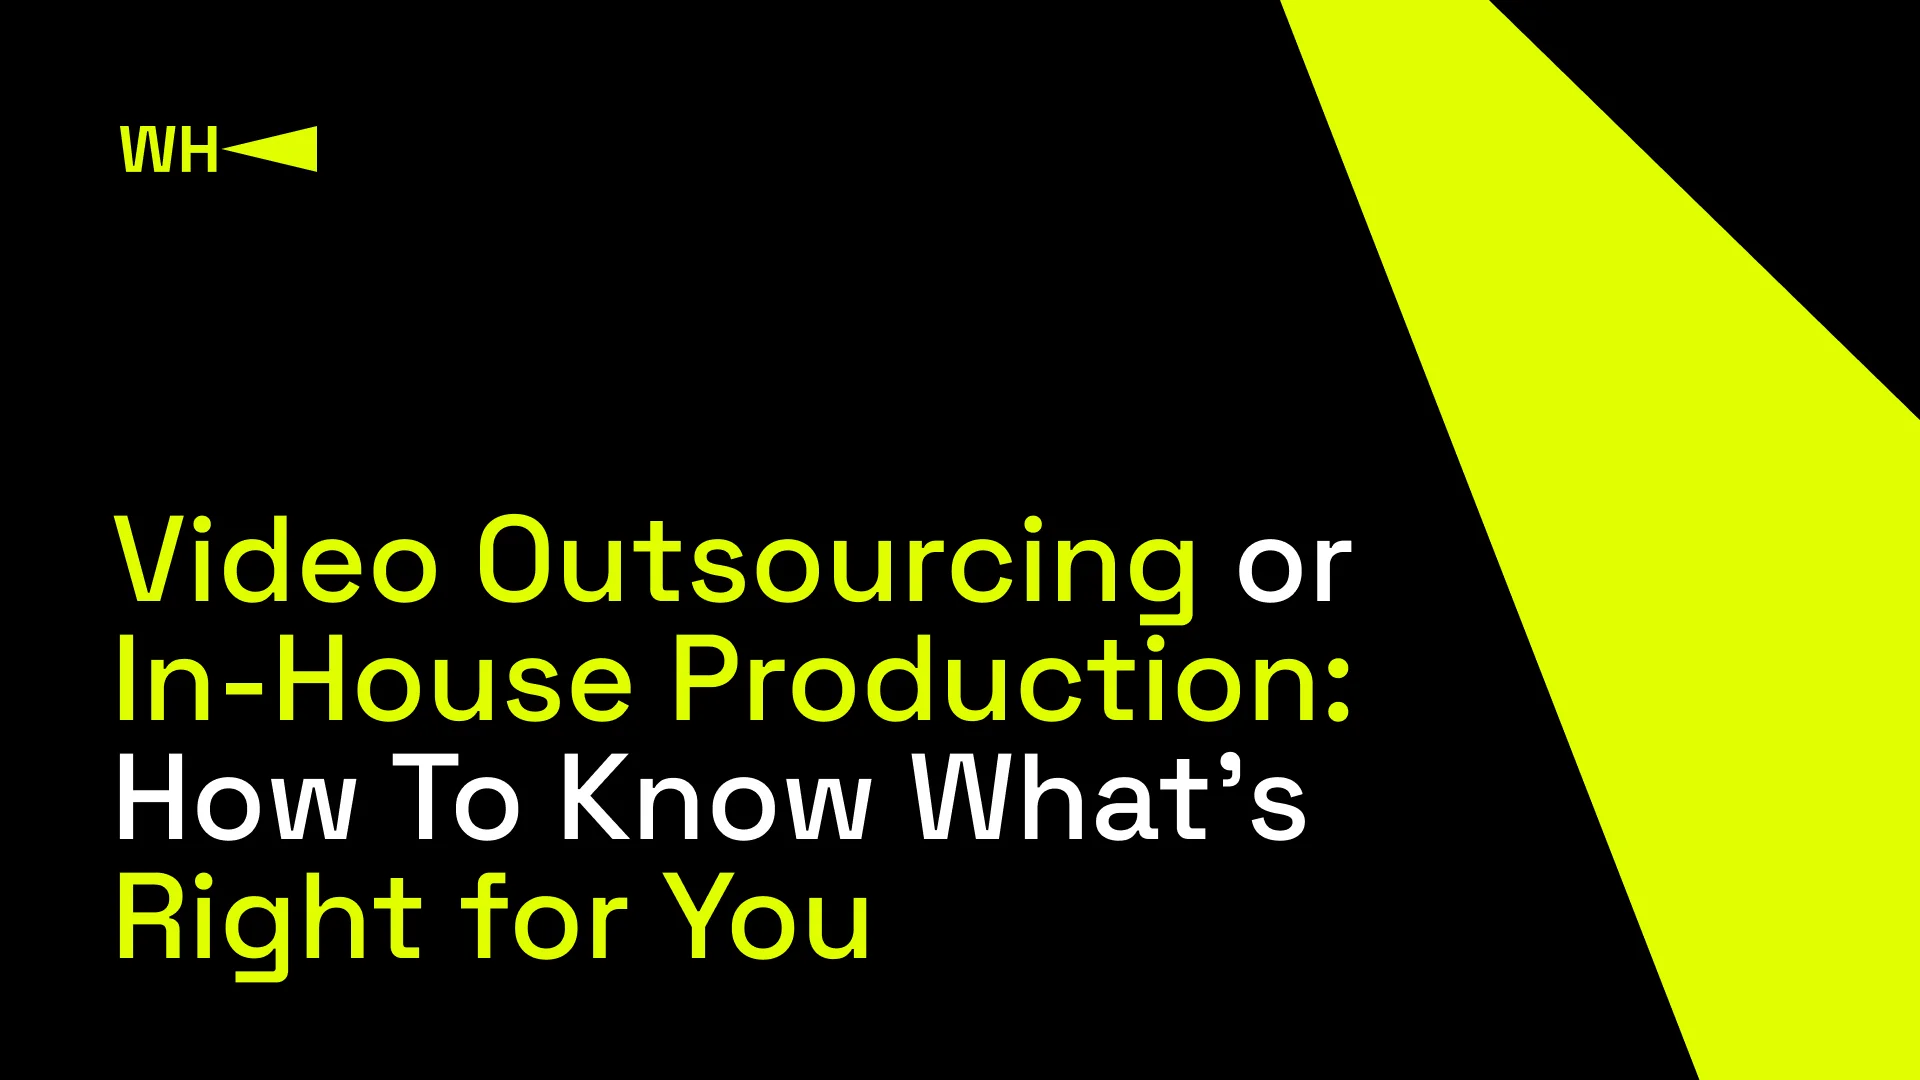 Video Outsourcing or In-House Production: How To Know What’s Right for You